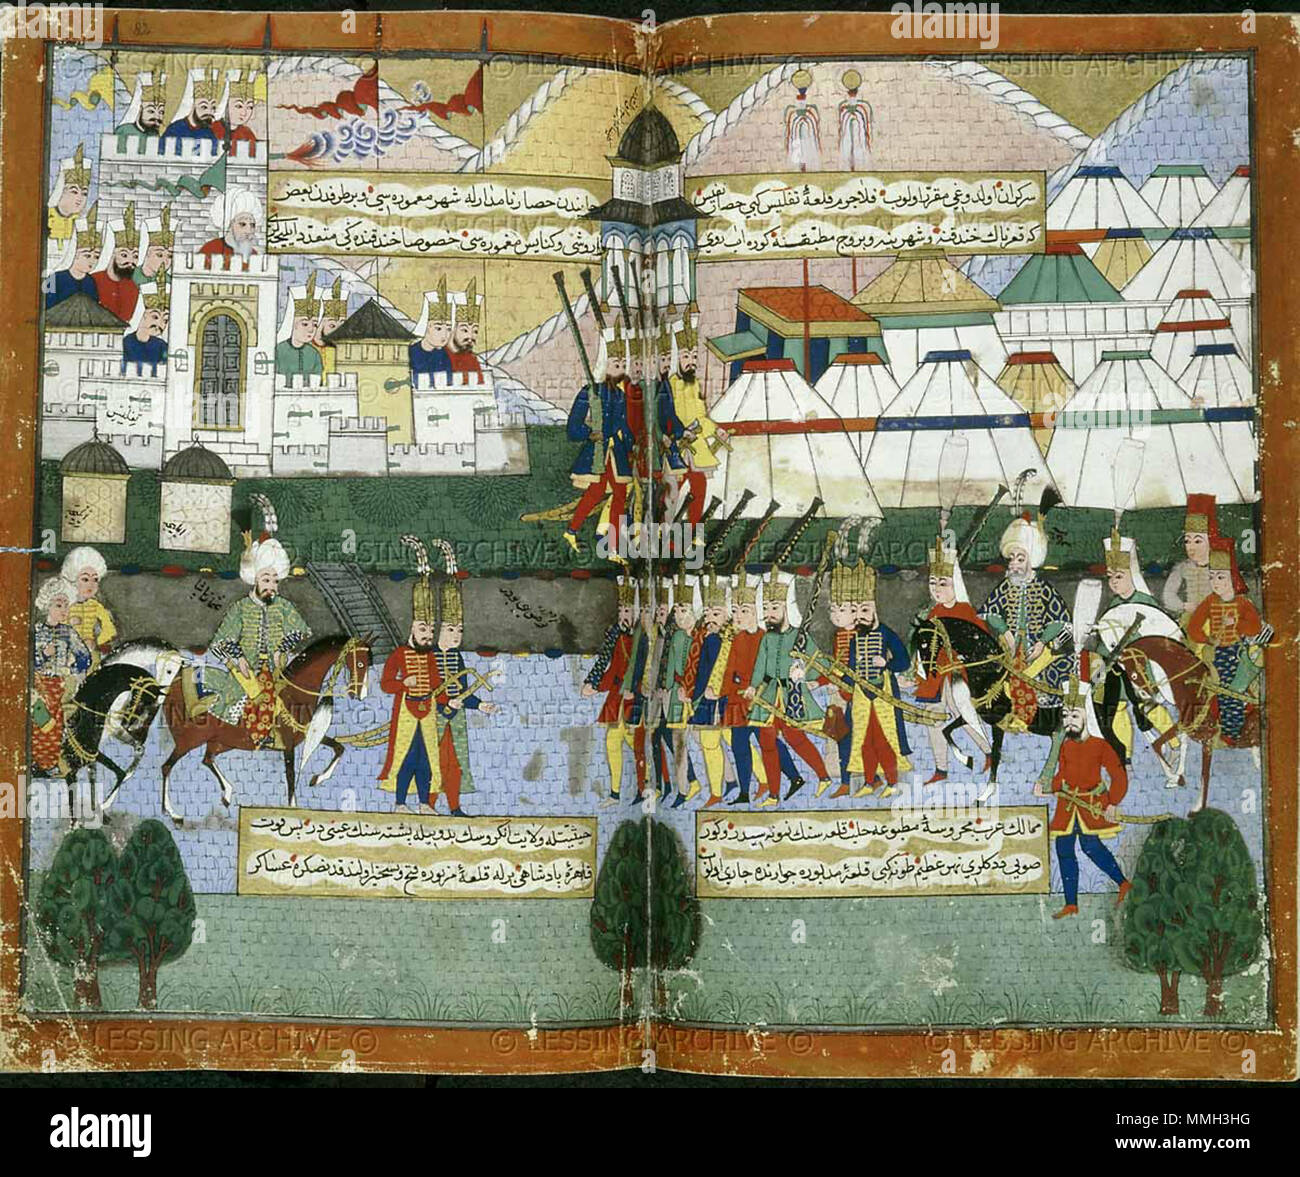 . English: Lala Mustafa Paşa's Ottoman army parading before the walls of Tiflis (Tbilisi) in August 1578 after the city had been evacuated by Da' ud Khan. A double-page miniature painting from a 16th-century Ottoman manuscript Nusretname ('The Book of Victories' by Gelibolulu Mustafa Ali).The British Library, London, Great Britain.  . 1582. unknown painter Ottoman army at Tiflis in 1578 (Nusretname miniature) Stock Photo